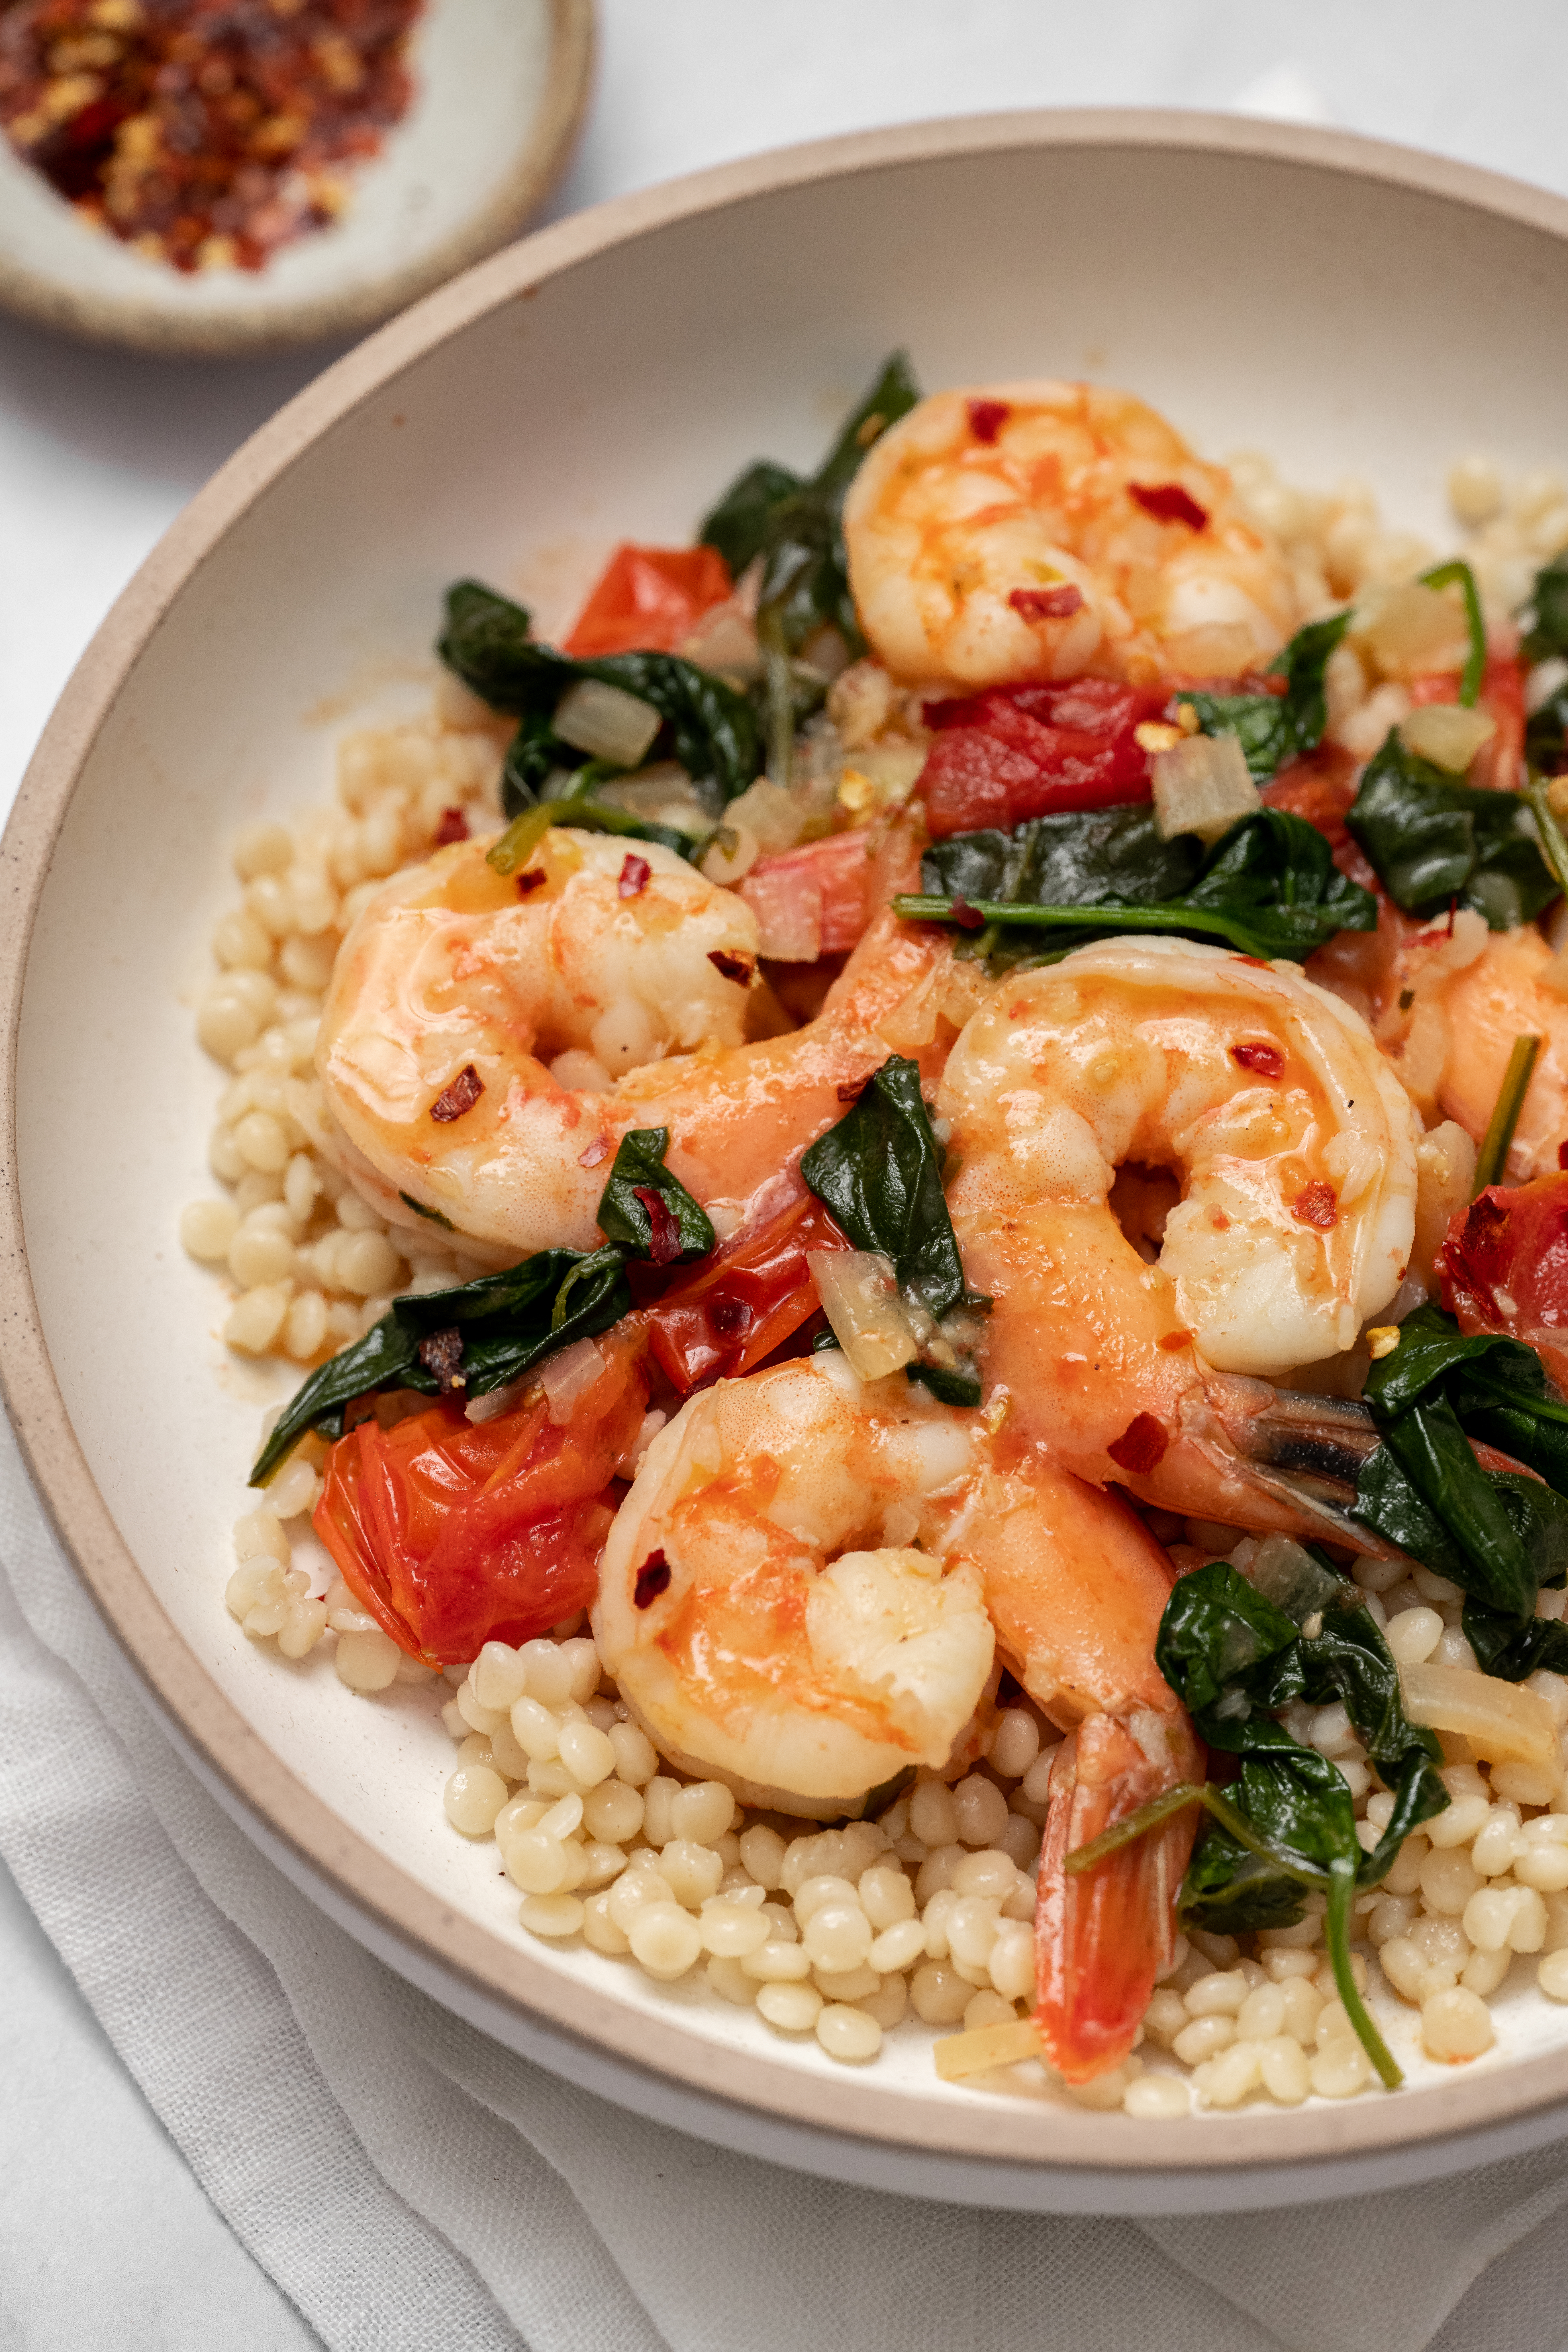 Prawns, spinach and tomatoes in a lemon garlic cream sauce with couscous